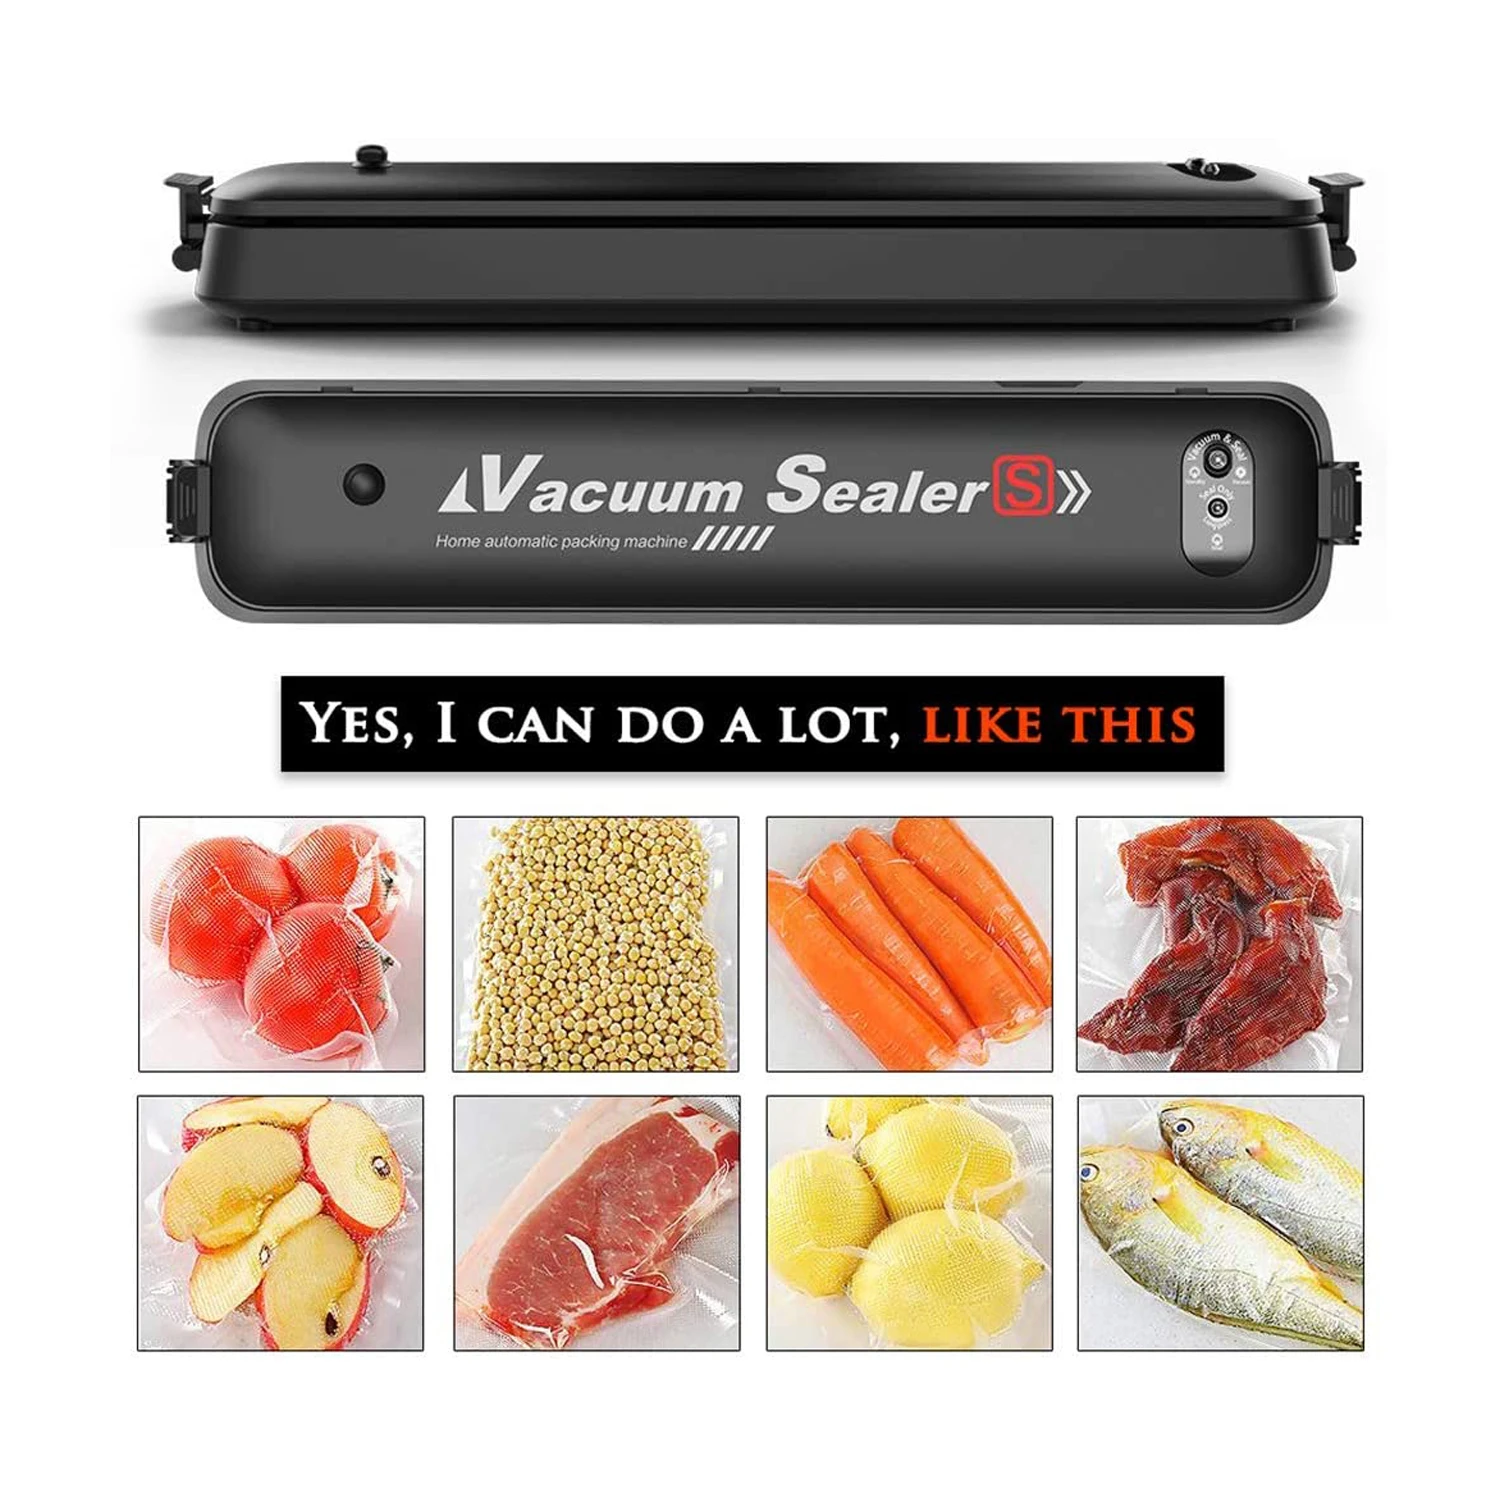 One-Touch Automatic Food Sealer with External Vacuum System for All Saving needs Powerful Vacuum Sealing Machine